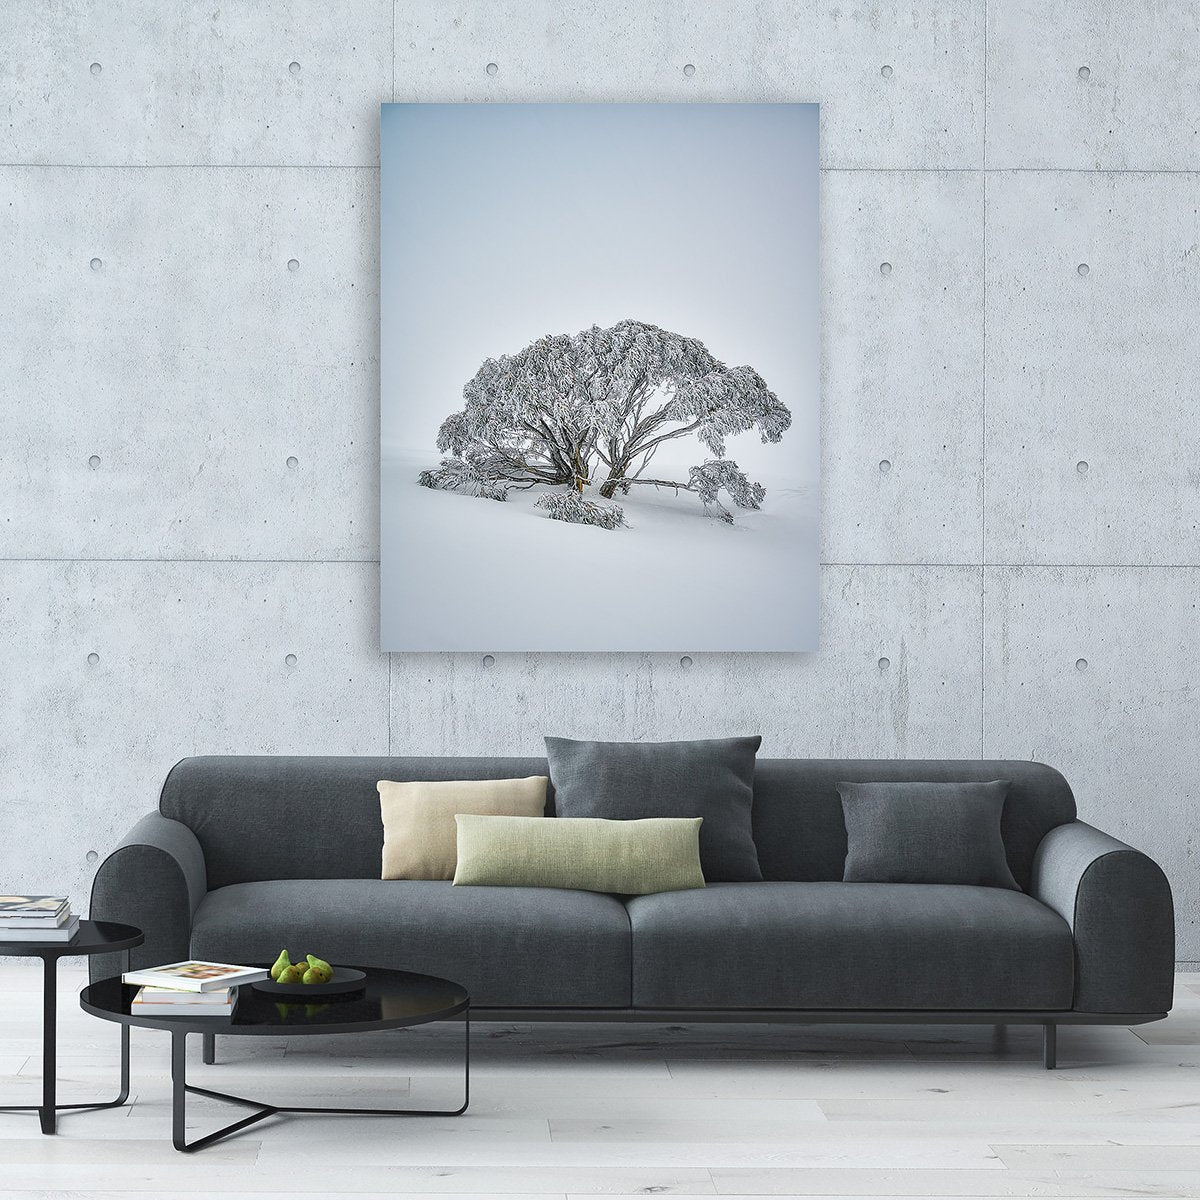 Chilled, Wall Art, In room example